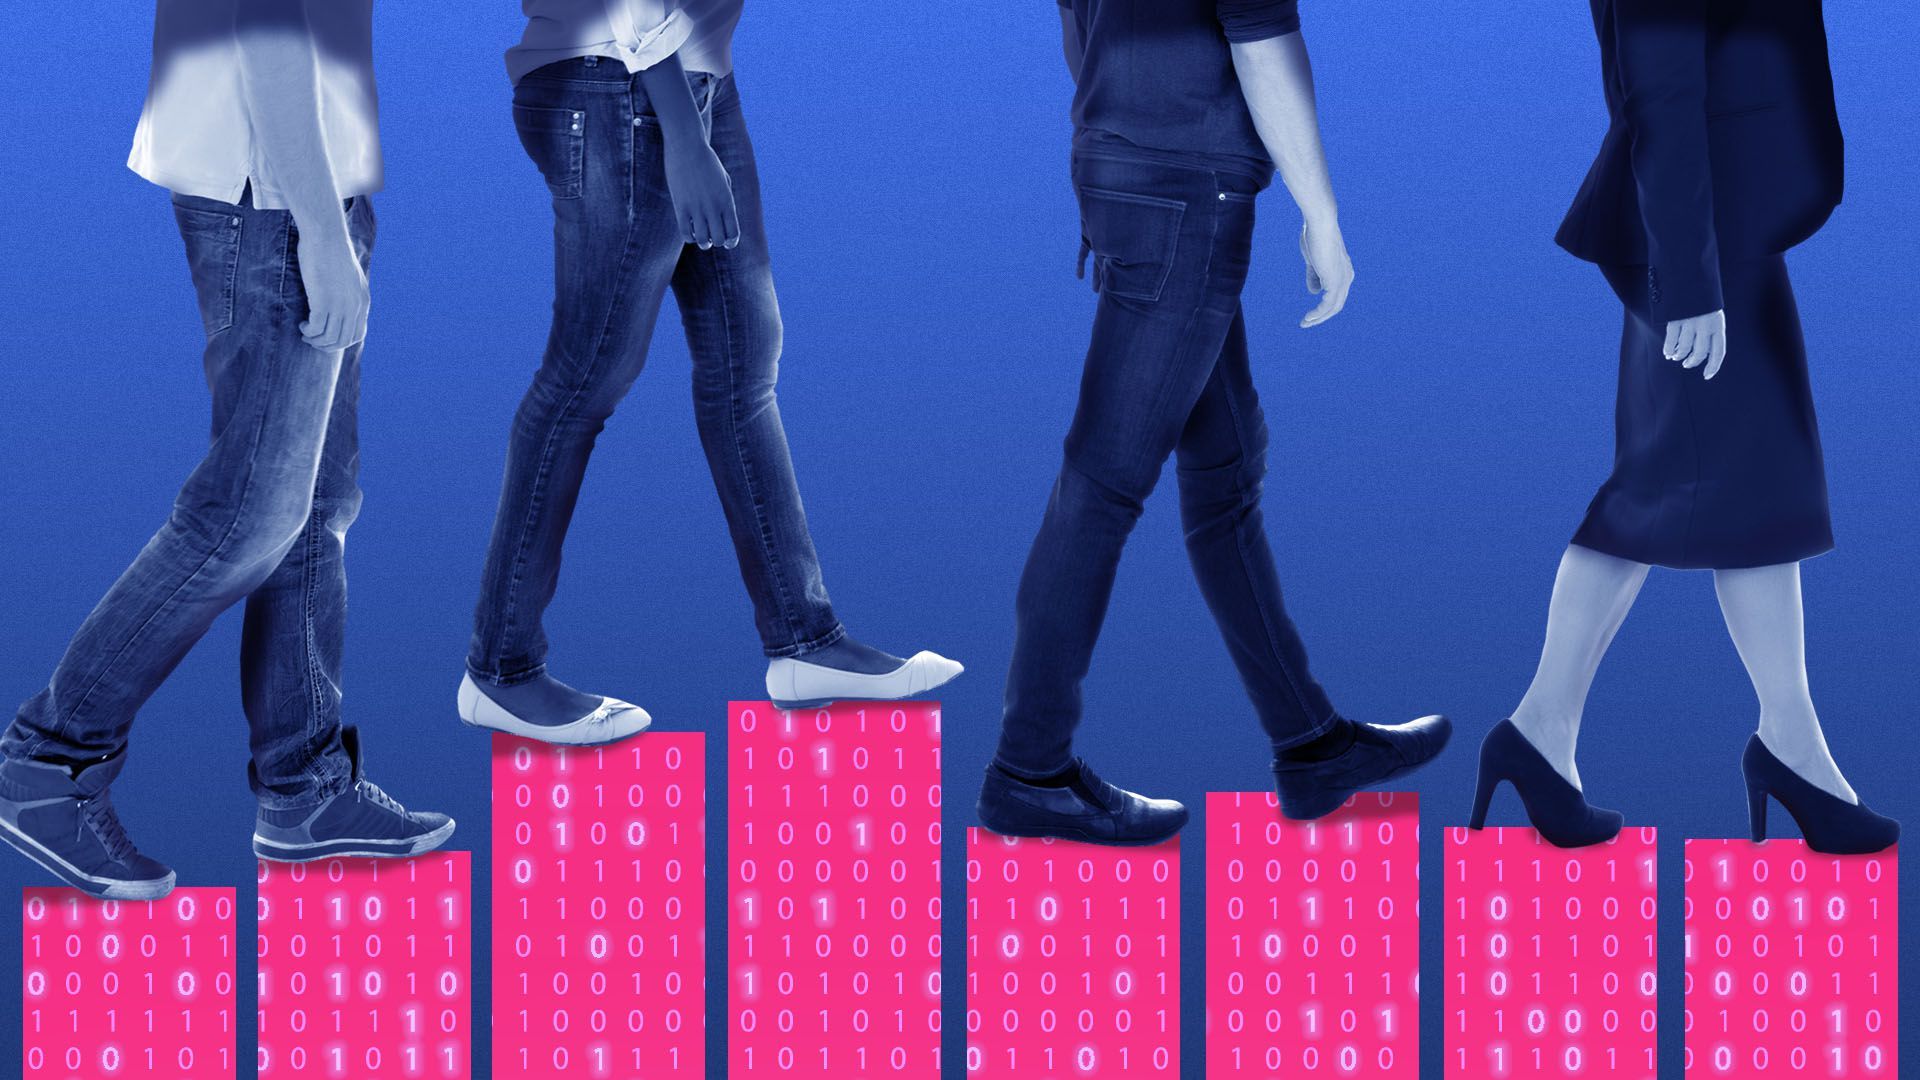 Illustration of a line of people walking along a bar chart with binary code